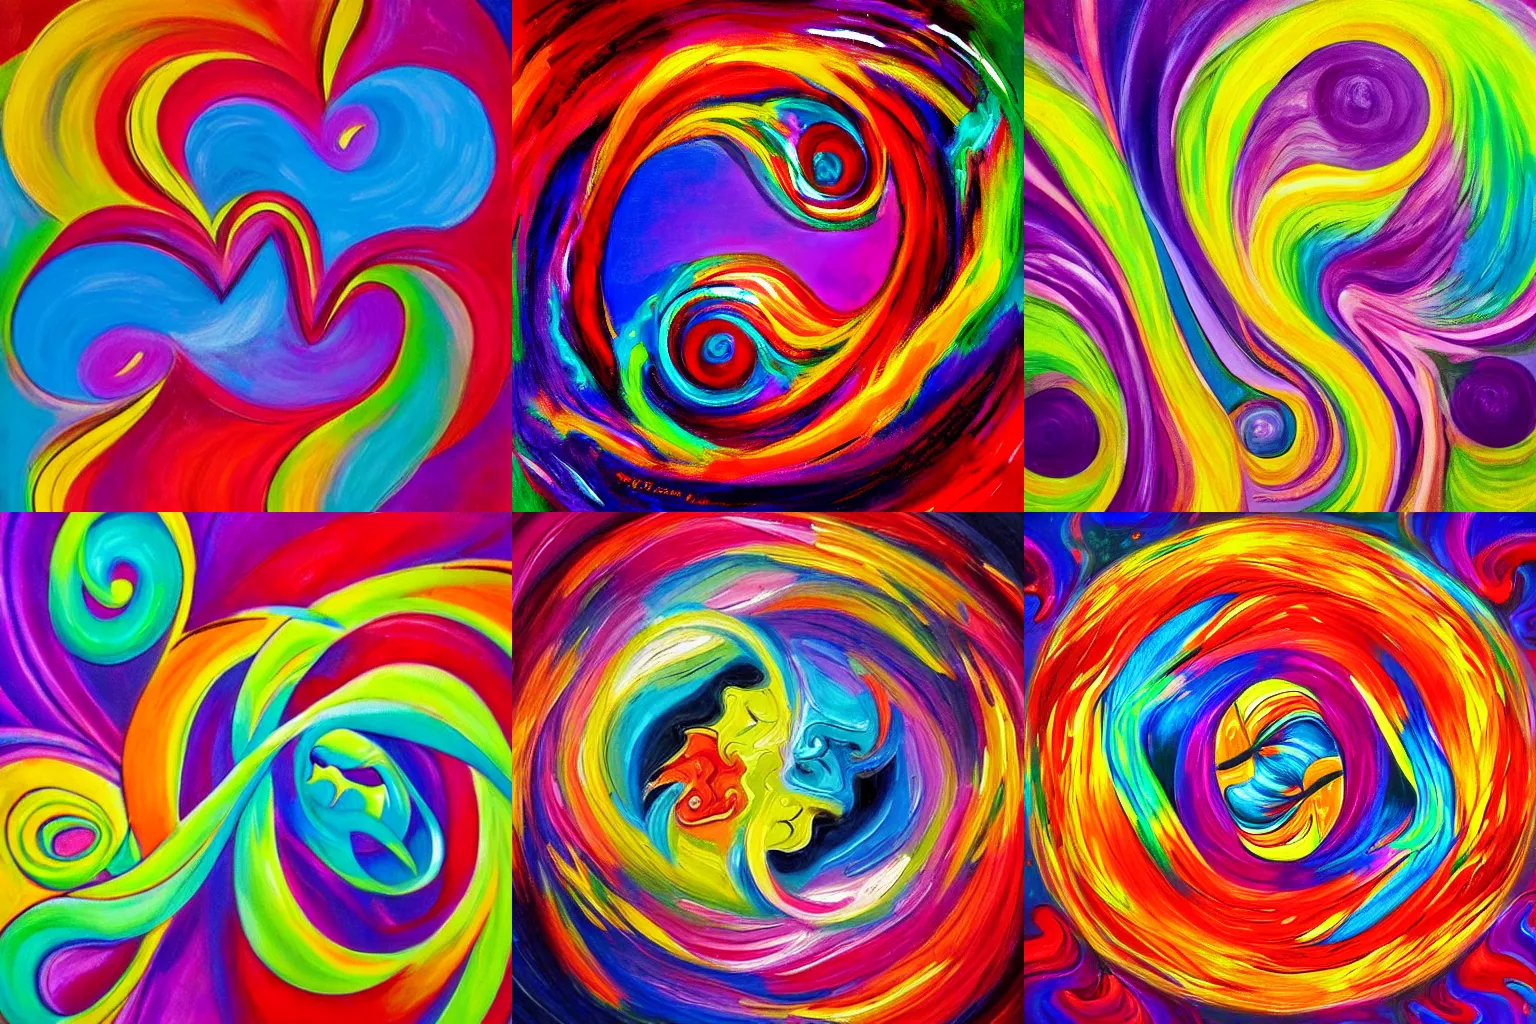 Prompt: This painting is a celebration of love in all its forms. It shows two lovers entwined in a passionate embrace, surrounded by a swirling vortex of energy. The colors are vibrant and alive, symbolizing the power and intensity of love. The painting conveys a sense of movement and dynamism, conveying the idea that love is a force that can change the world